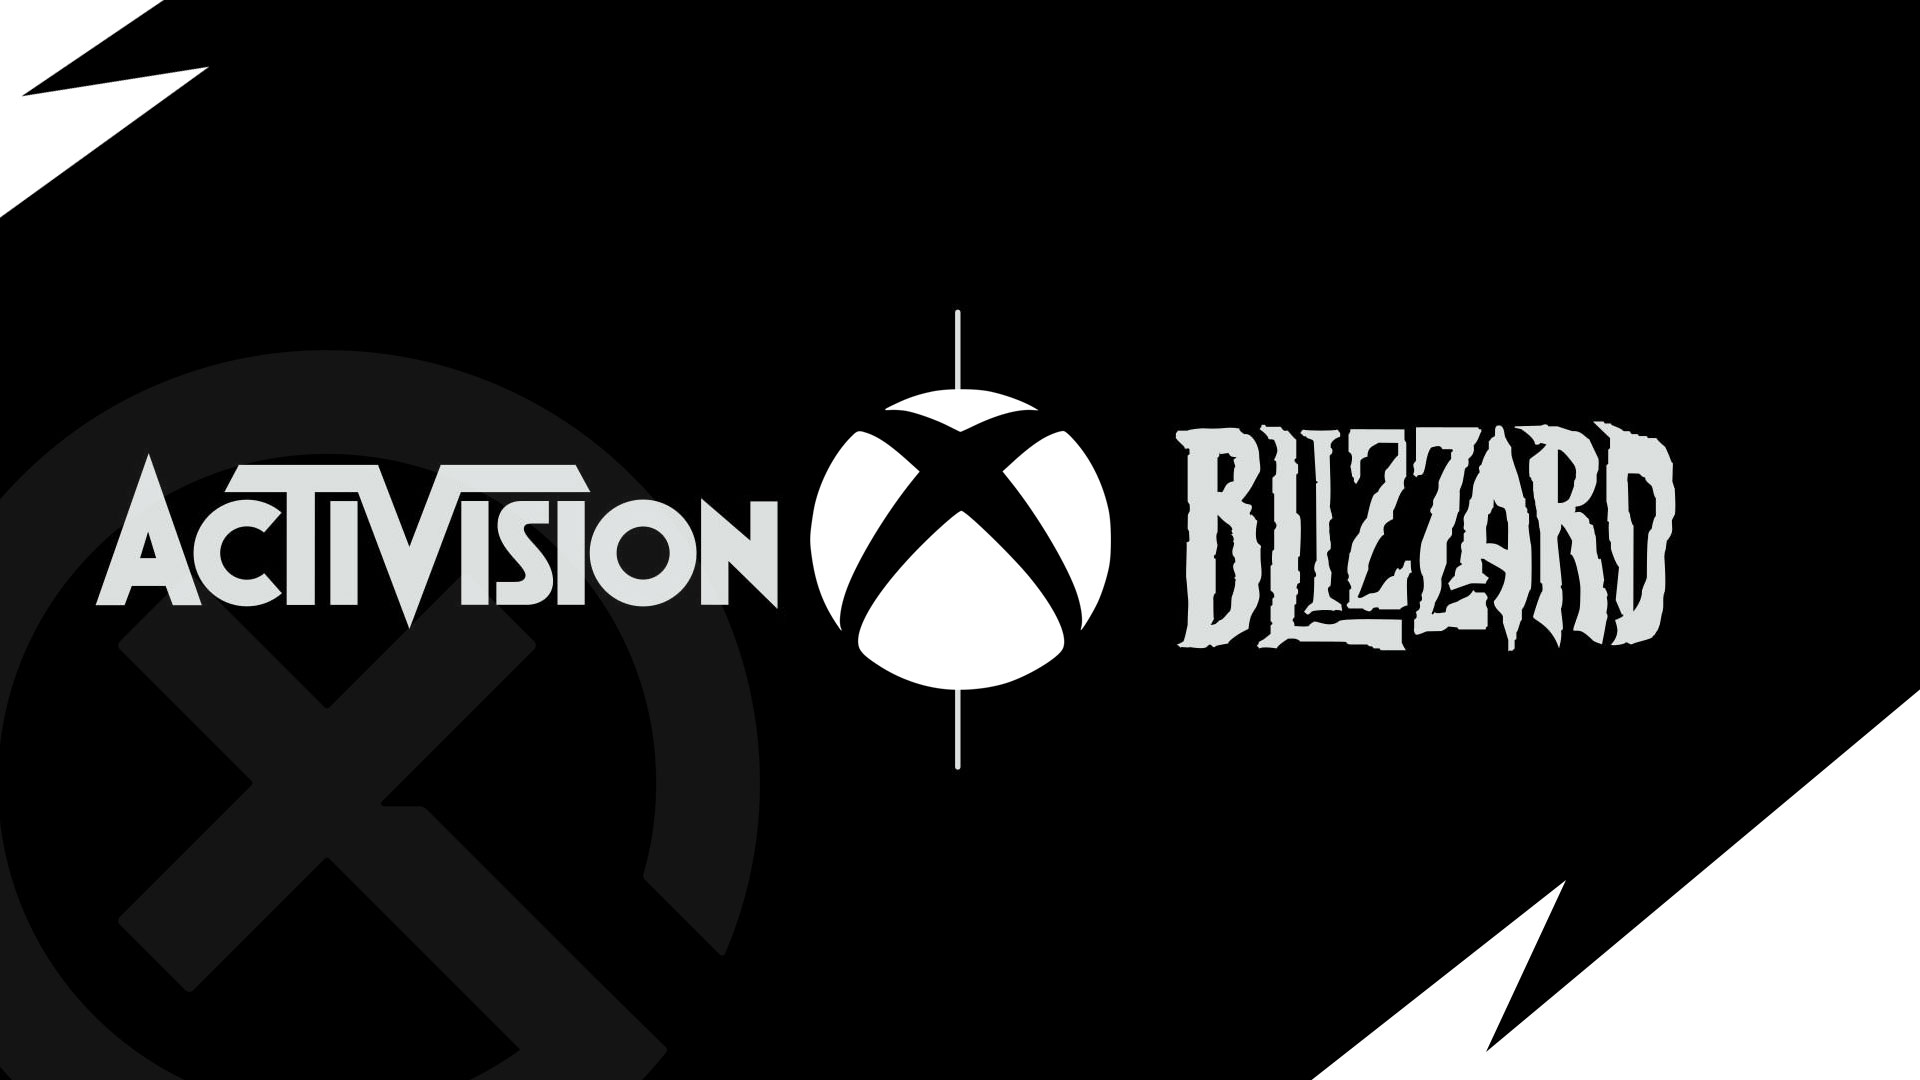 Activision-Blizzard: New Zealand asks for more time to make decision on acquisition